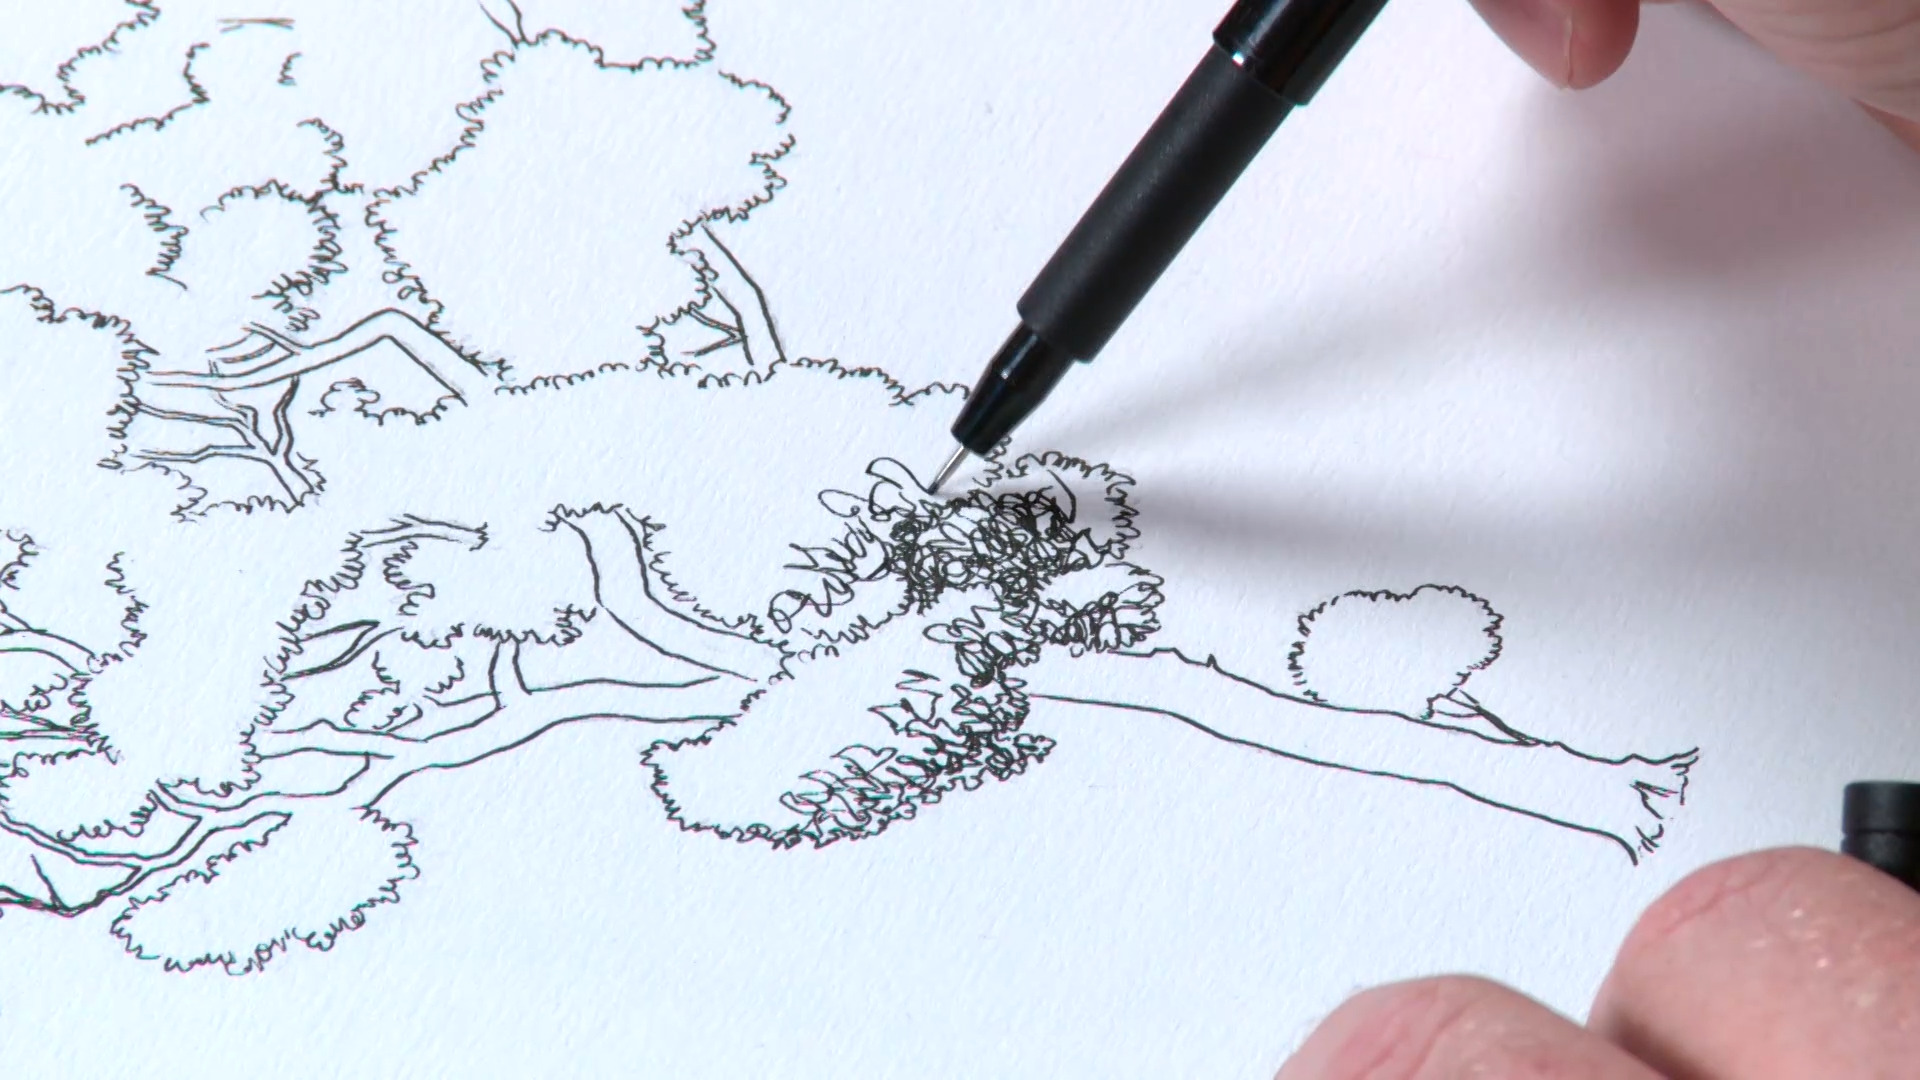 Improve Your Drawing Skills With Our Free Drawing Tutorials for Artists